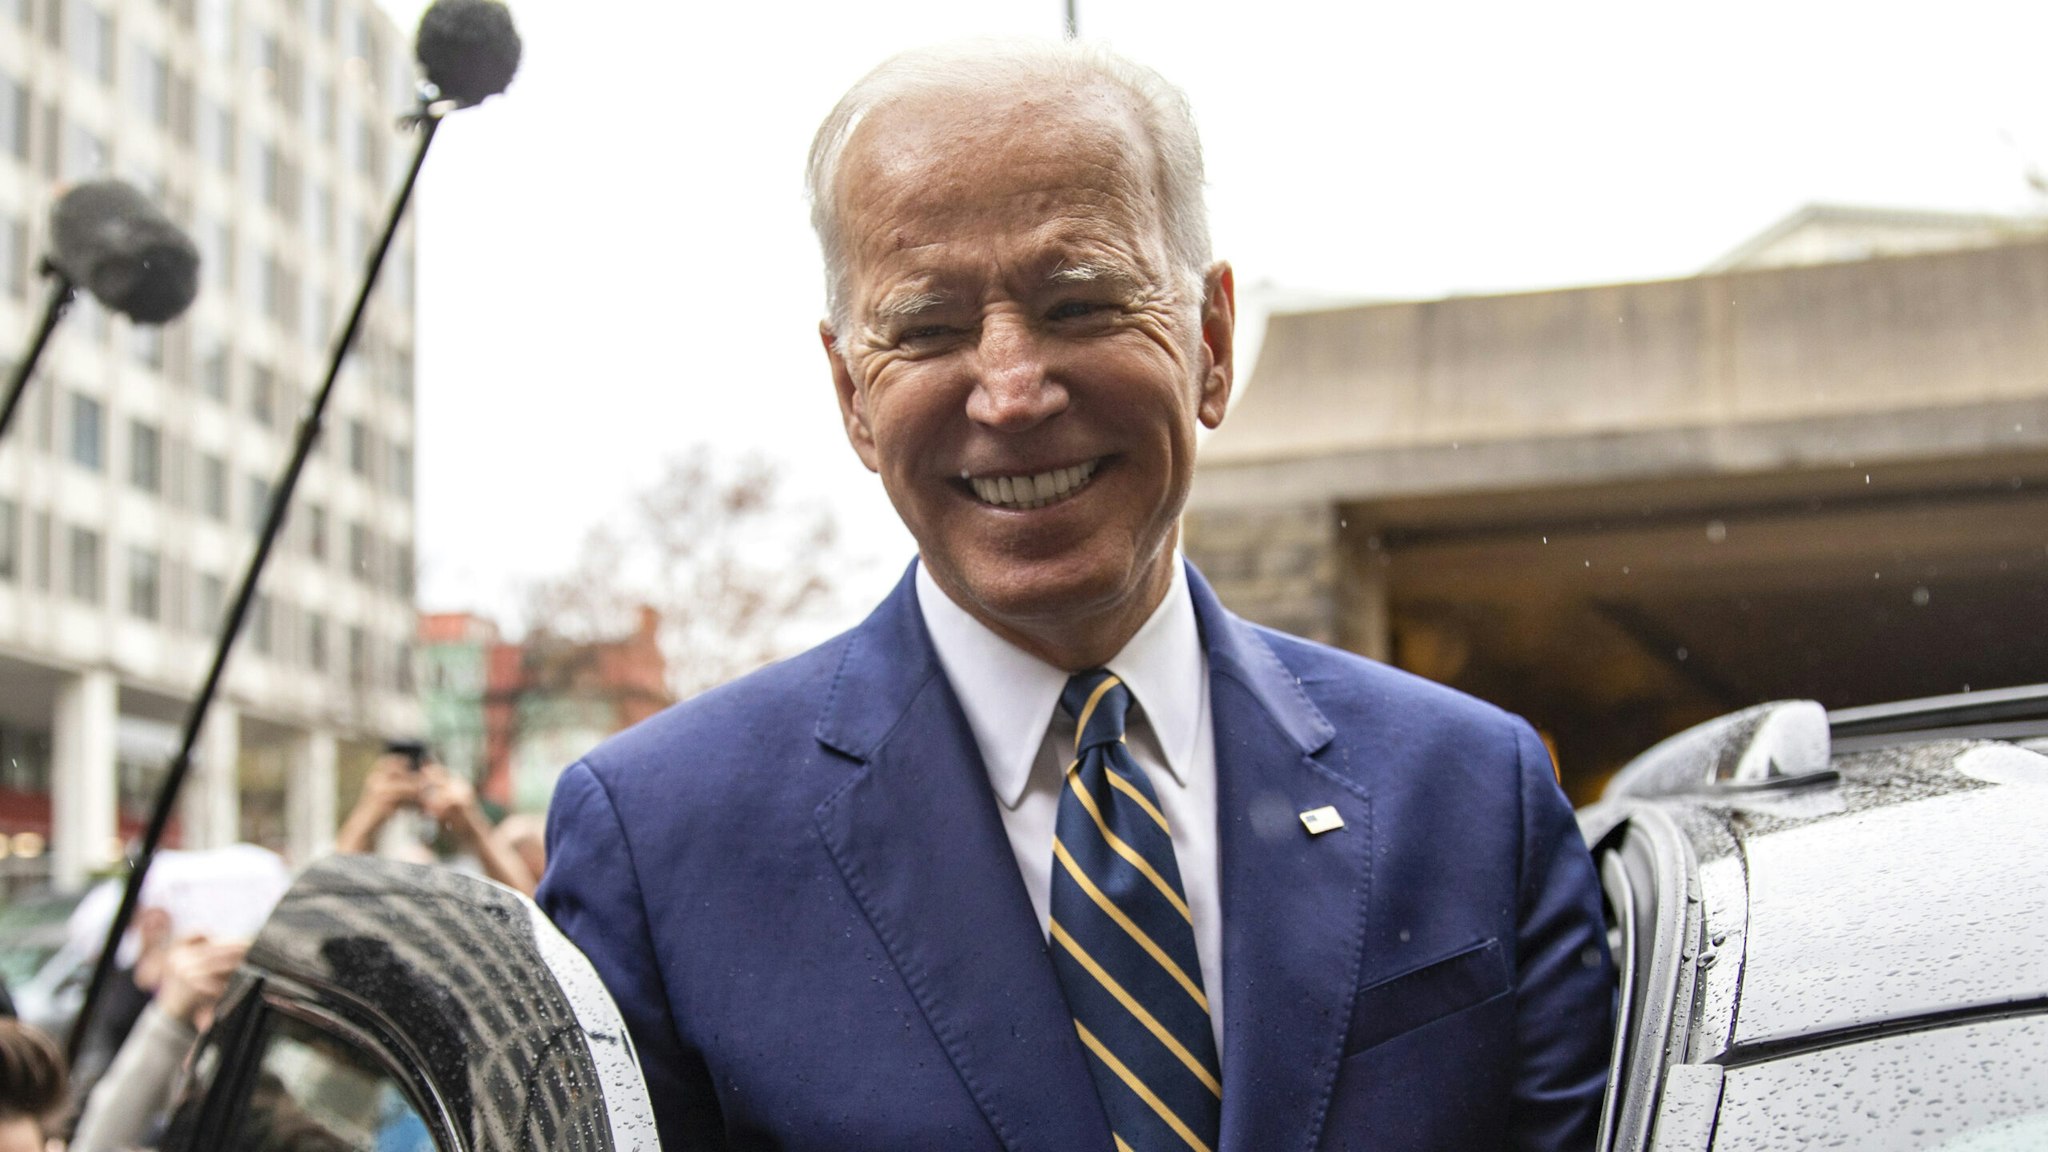 WASHINGTON, DC - APRIL 05: Former Vice President Joe Biden waves to supporters at the International Brotherhood of Electrical Workers Construction and Maintenance conference on April 05, 2019 in Washington, DC. Former Vice President Joe Biden on Friday called President Donald Trump a "tragedy in two acts" for the way he characterizes people and is consumed with personal grievances.